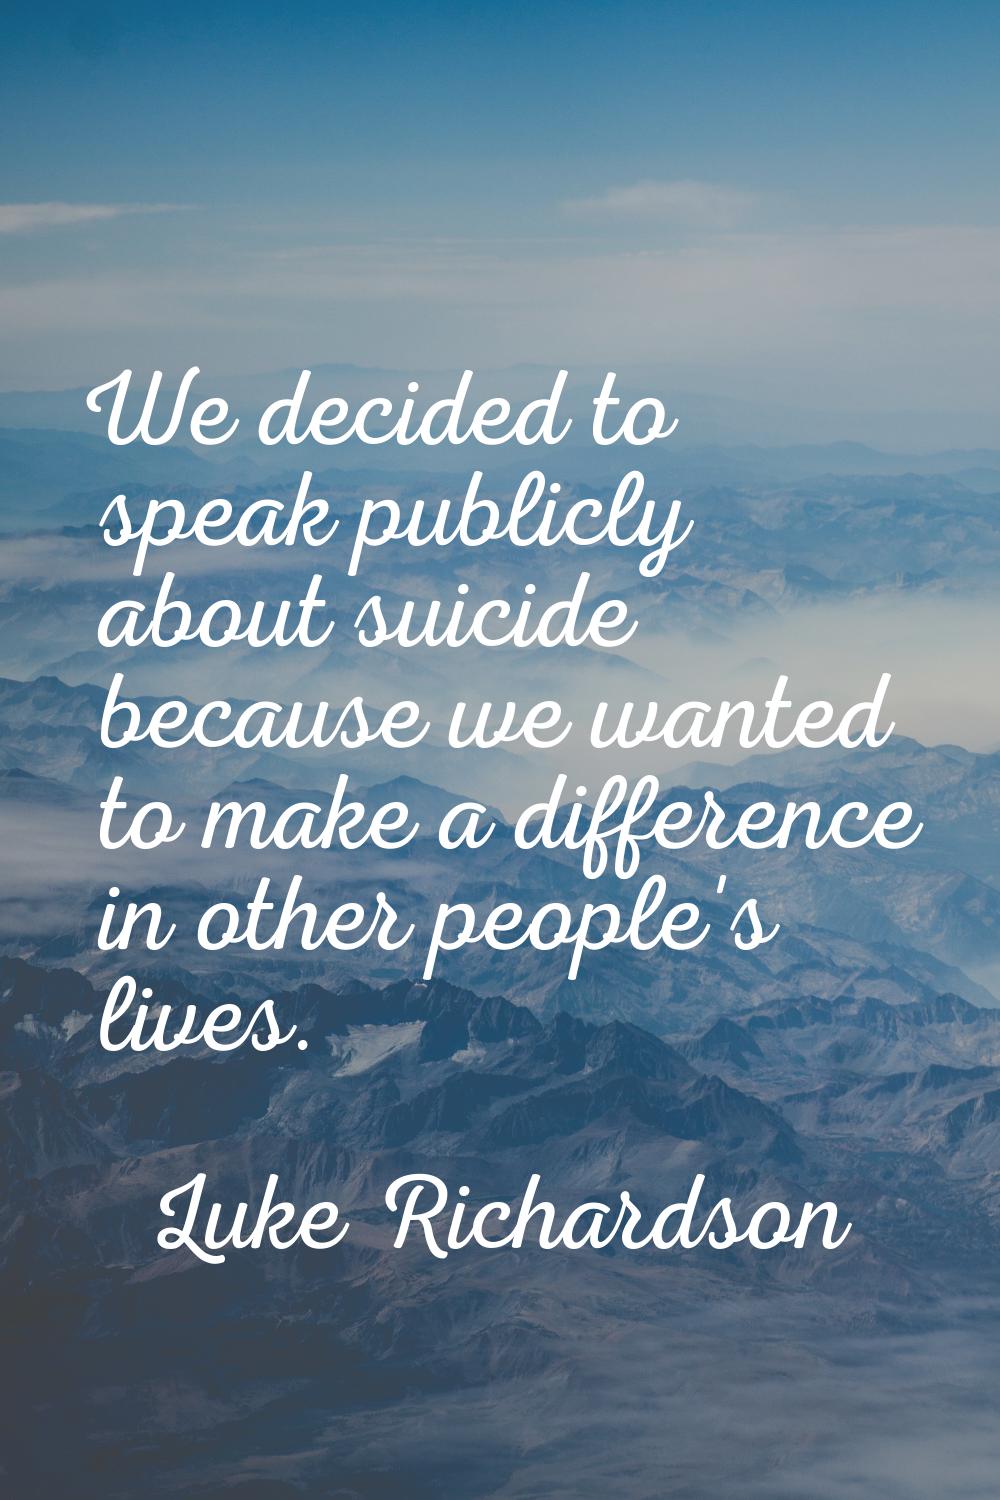 We decided to speak publicly about suicide because we wanted to make a difference in other people's